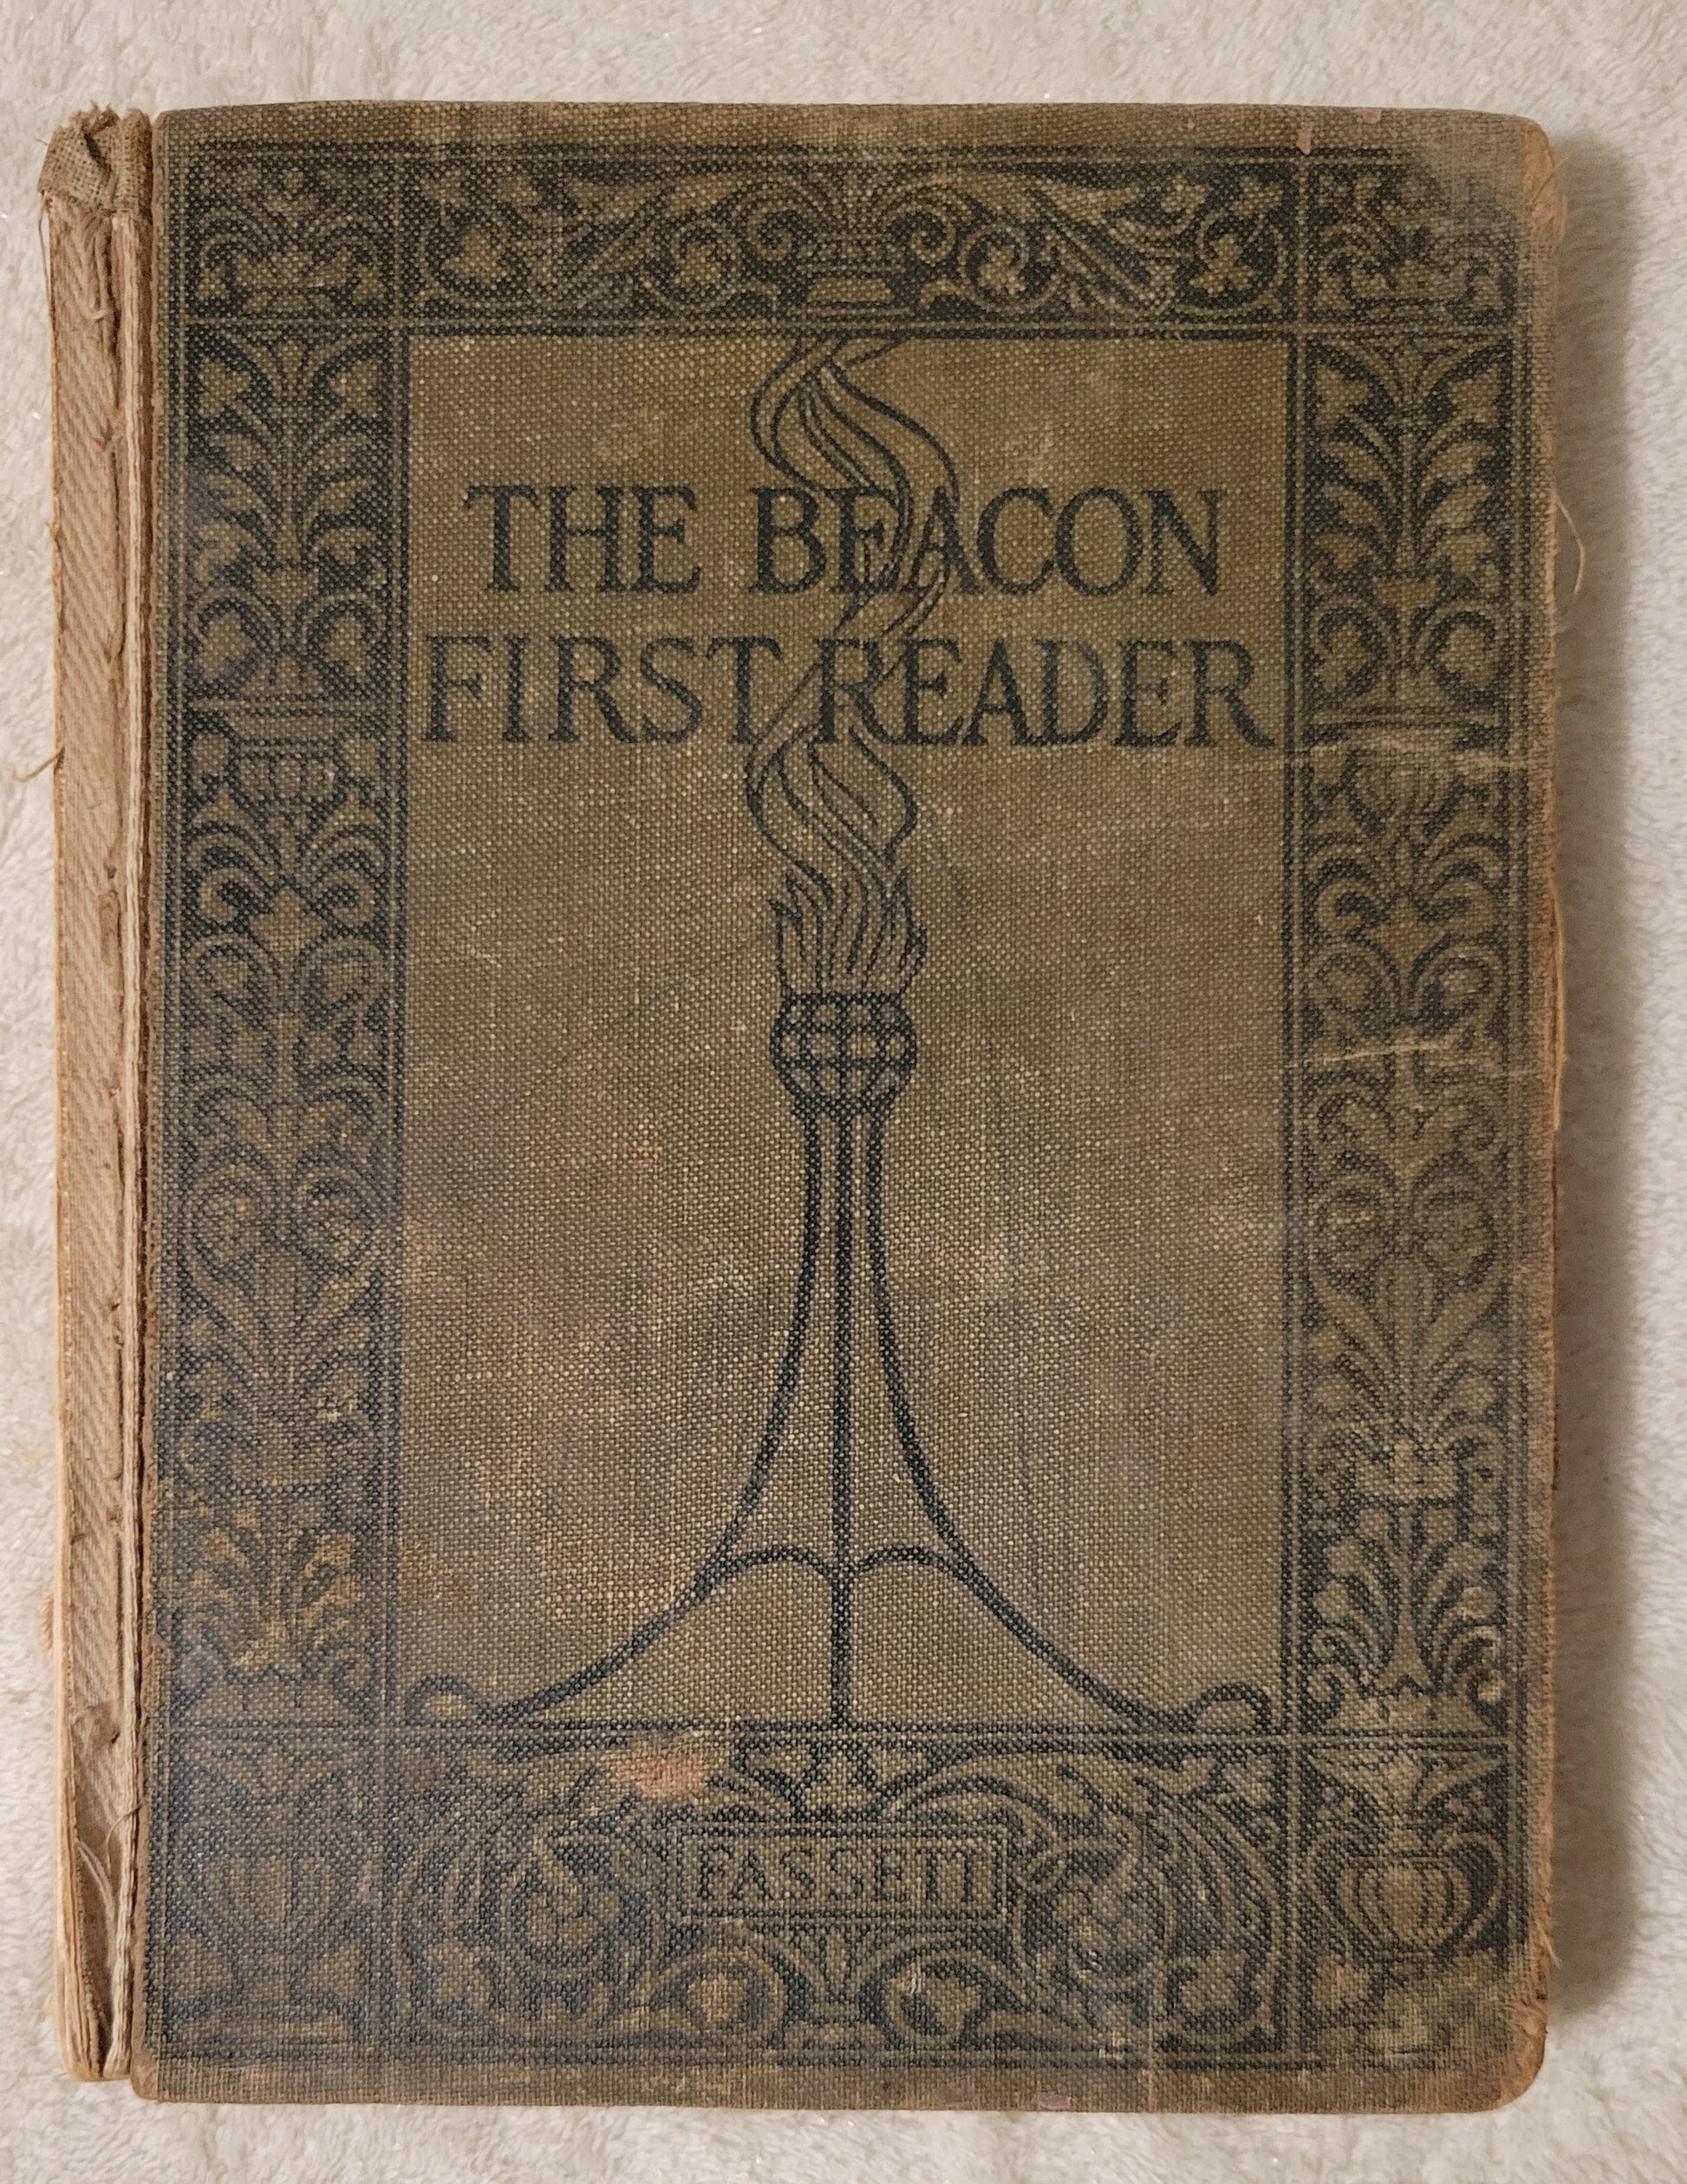 Antique book for sale "The Beacon First Reader" by James H. Fassett, Ginn and Company, 1913.  A child's schoolbook. Front cover.